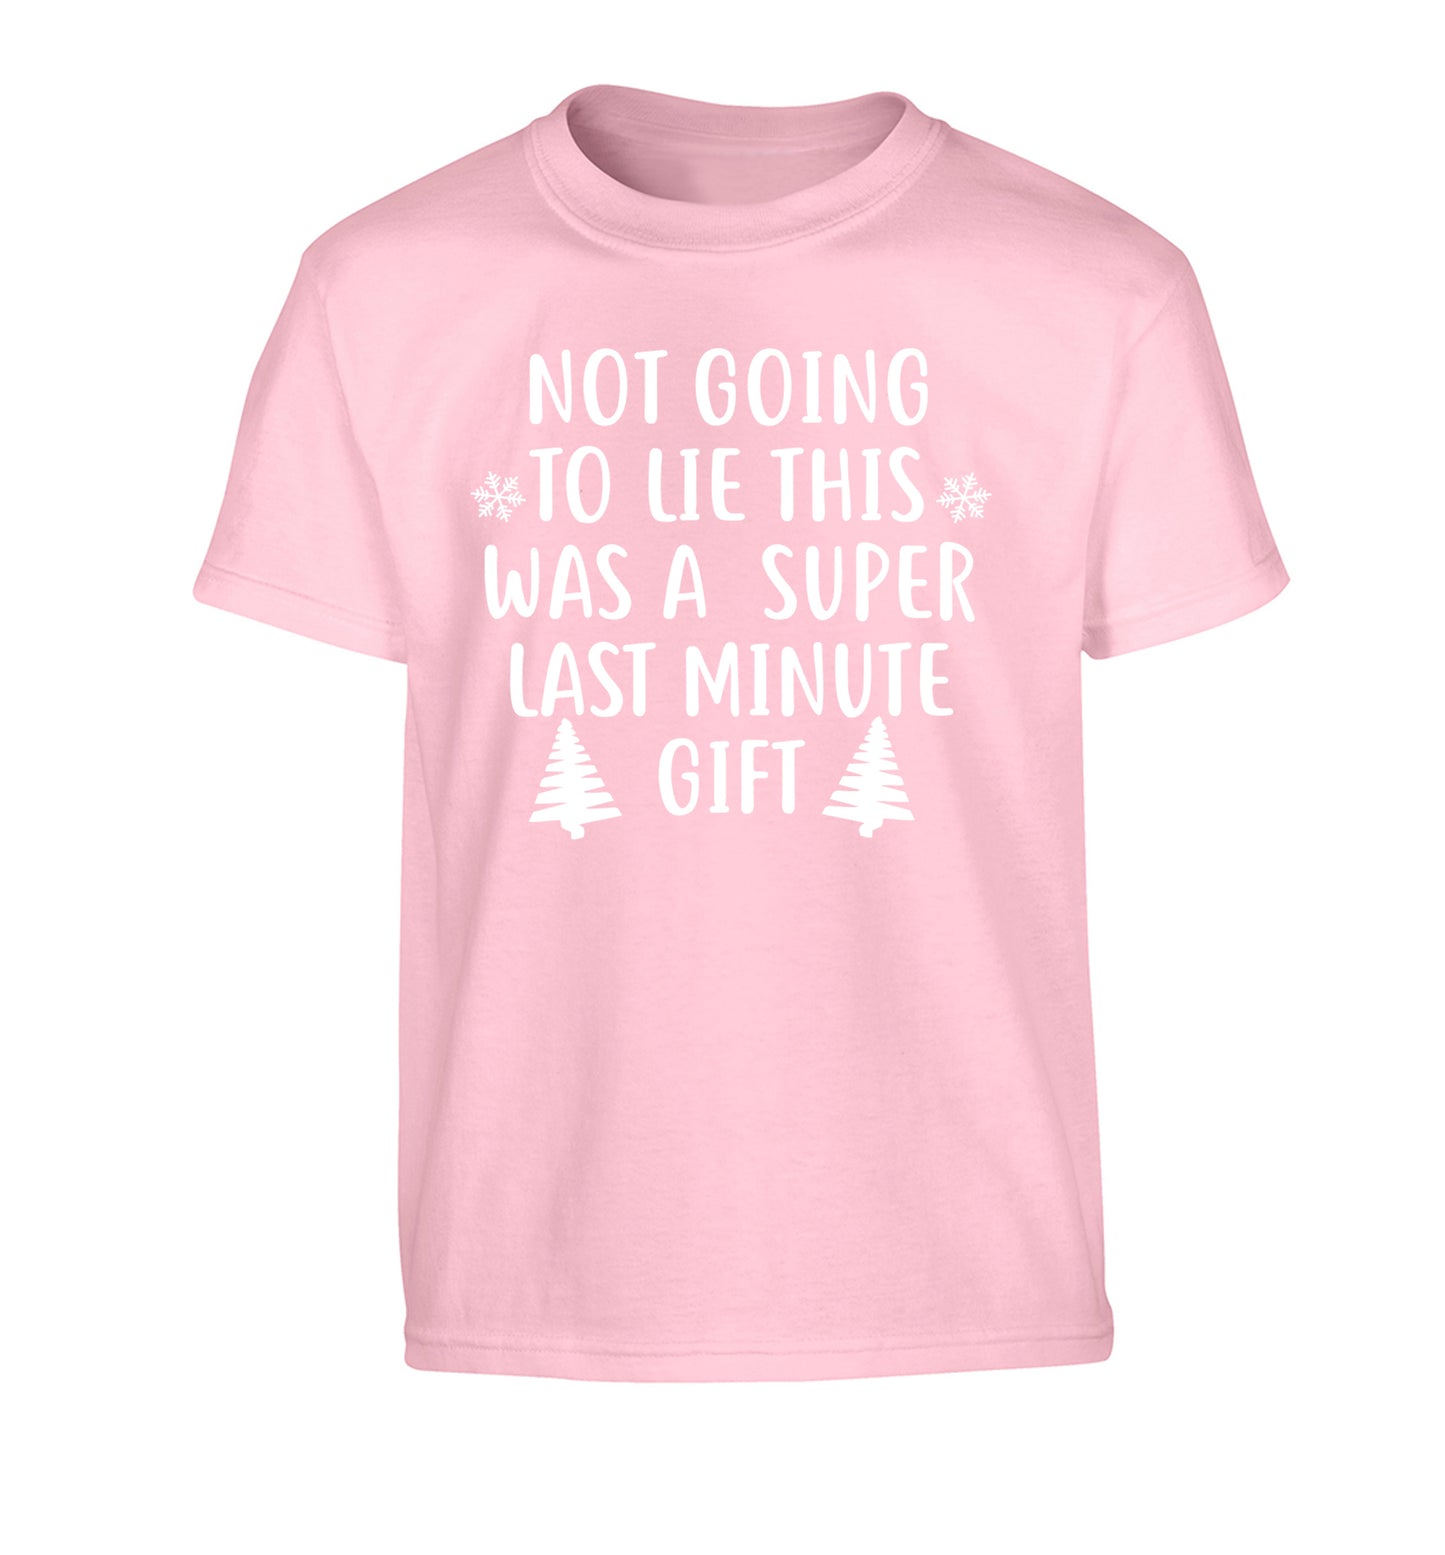 Not going to lie this was a super last minute gift Children's light pink Tshirt 12-13 Years